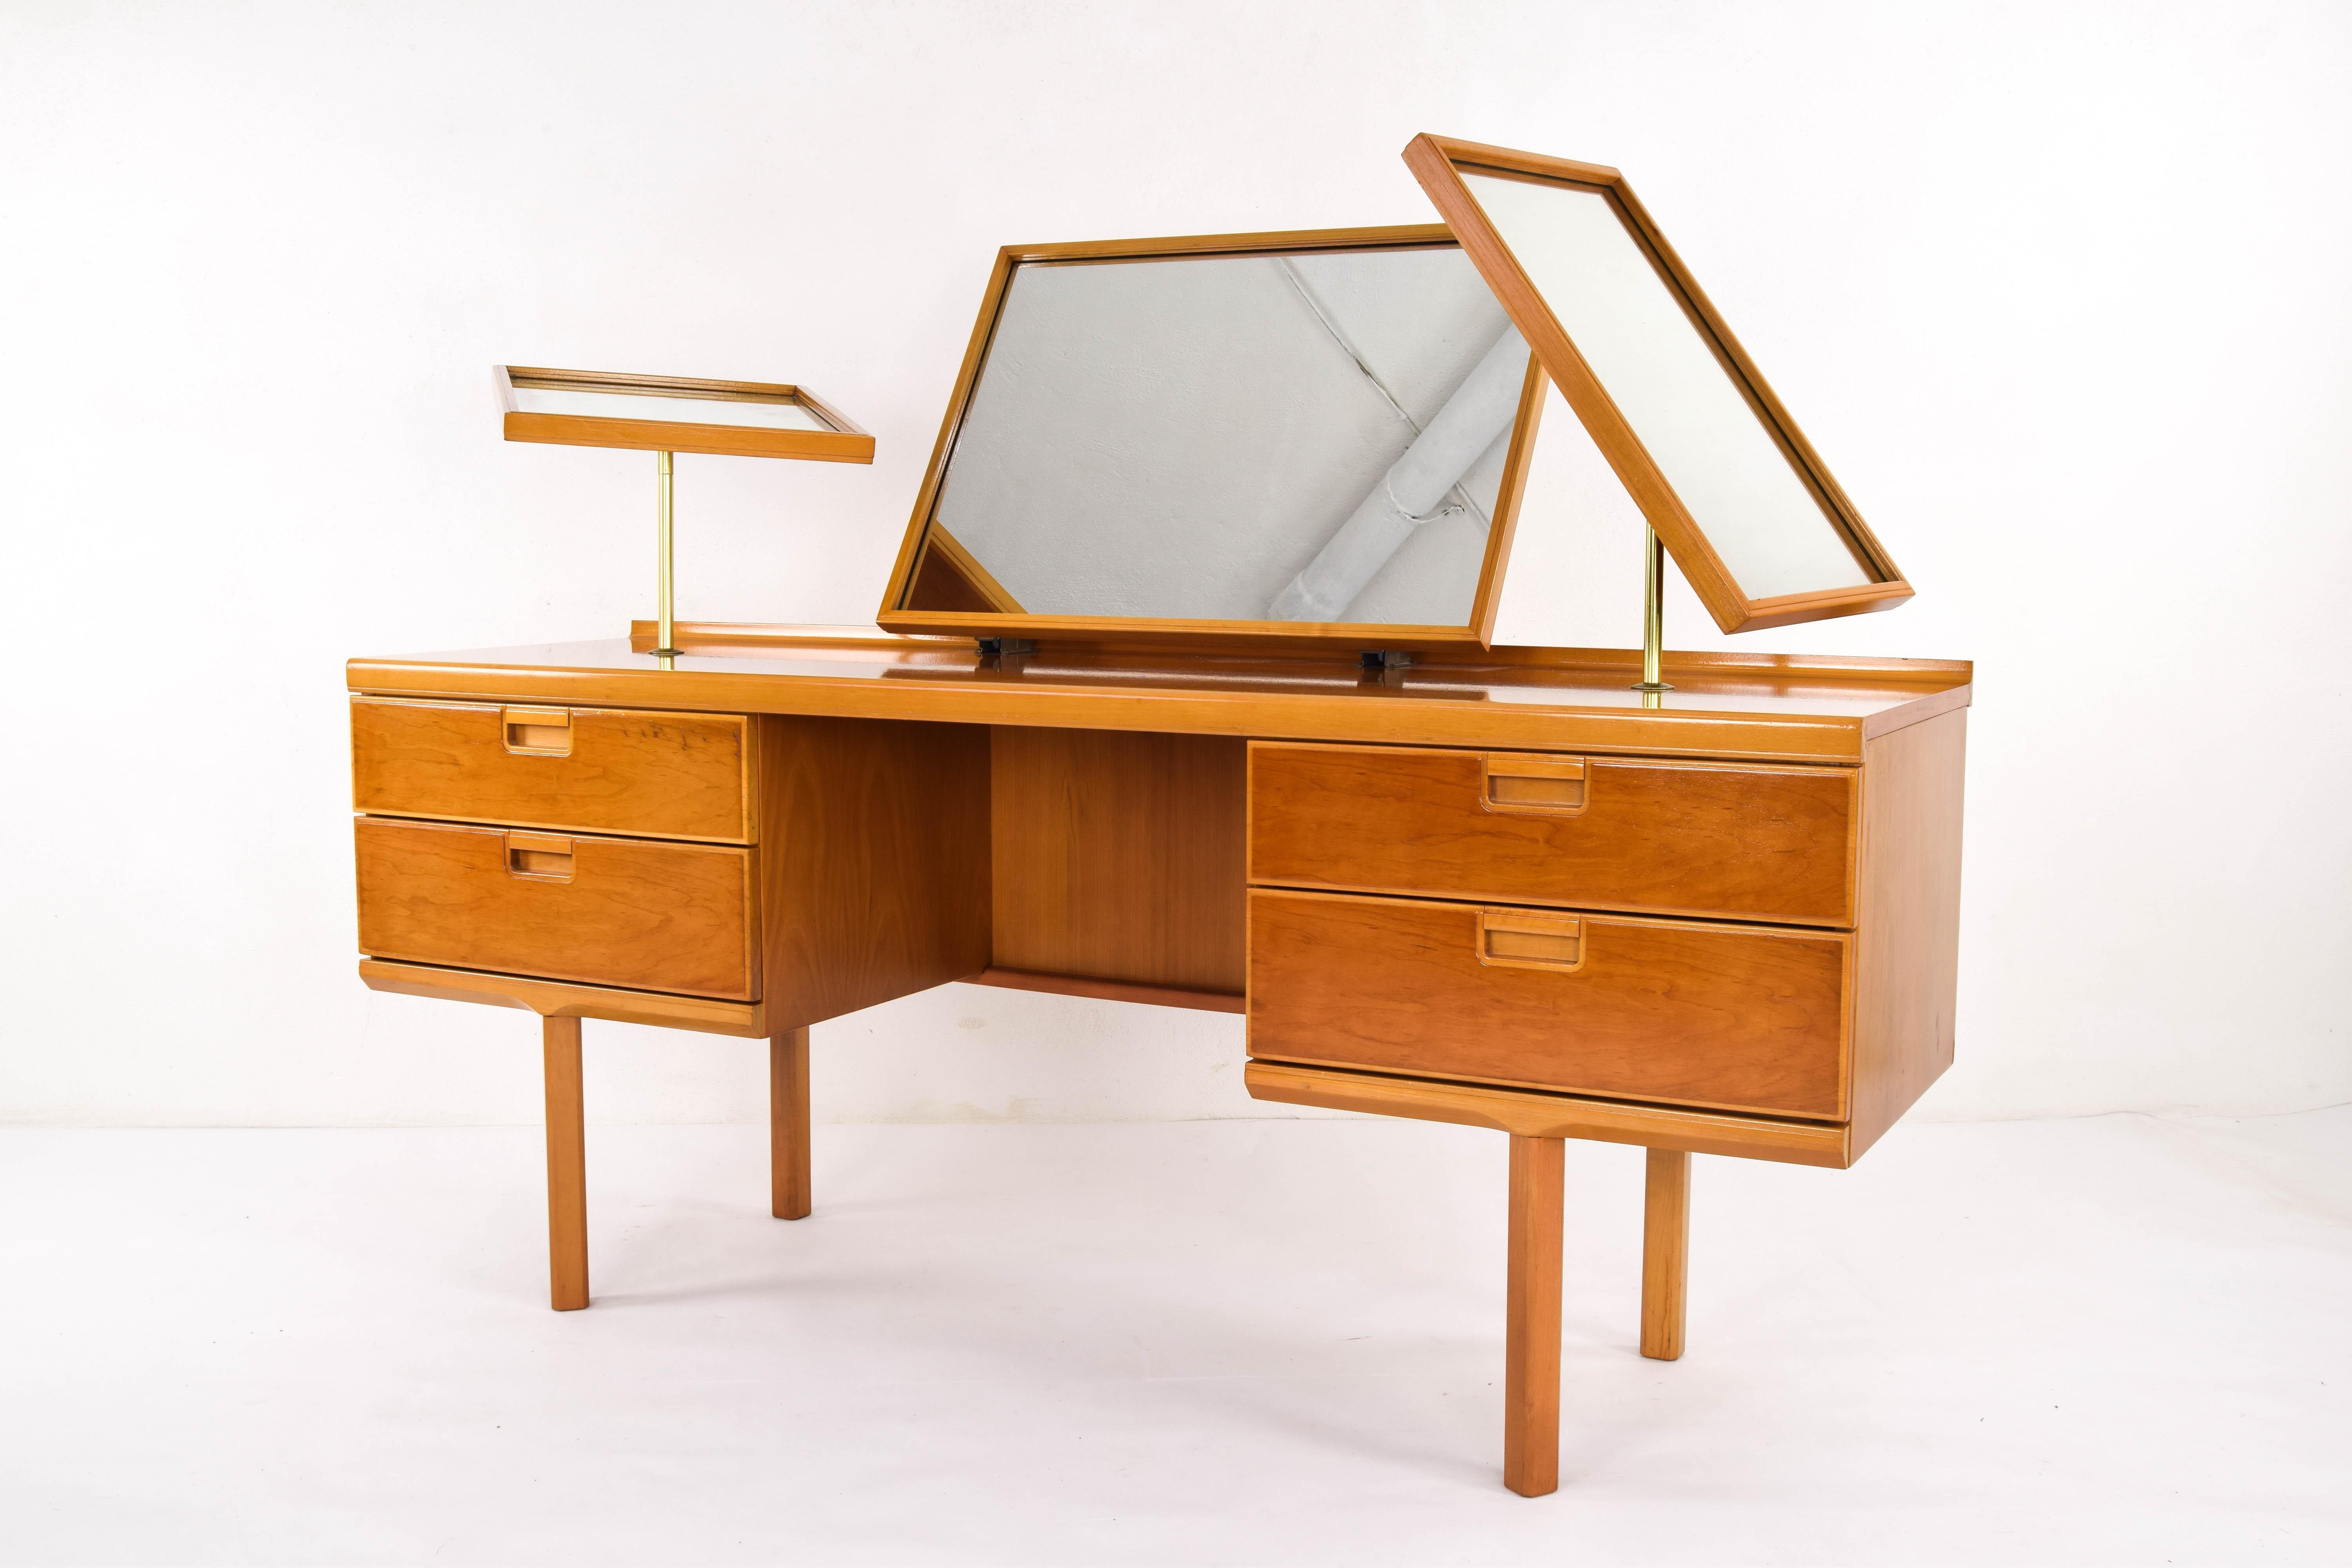 20th Century Mid-Century Modern British Beechwood Dressing Table with Triptych Mirror 1960s